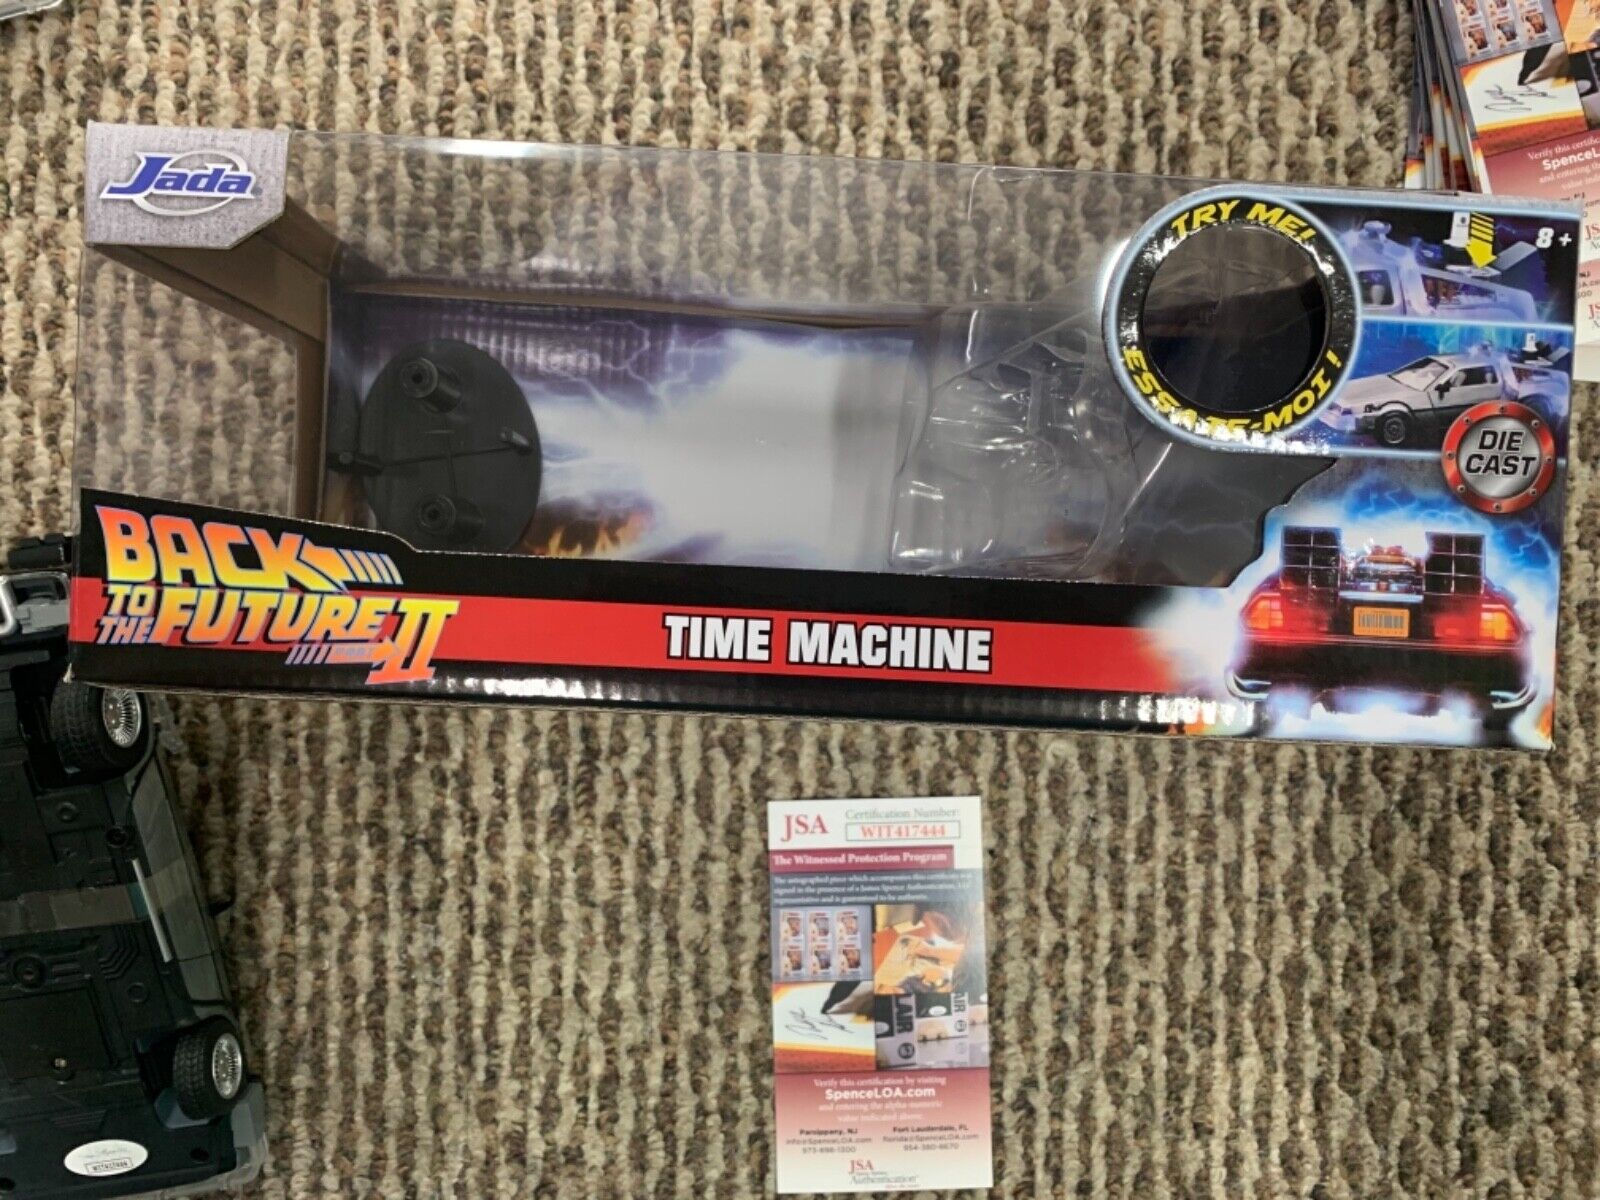 Back To the Future 1/24 Diecast sign Michael J Fox Marty McFly JSA Time Machine